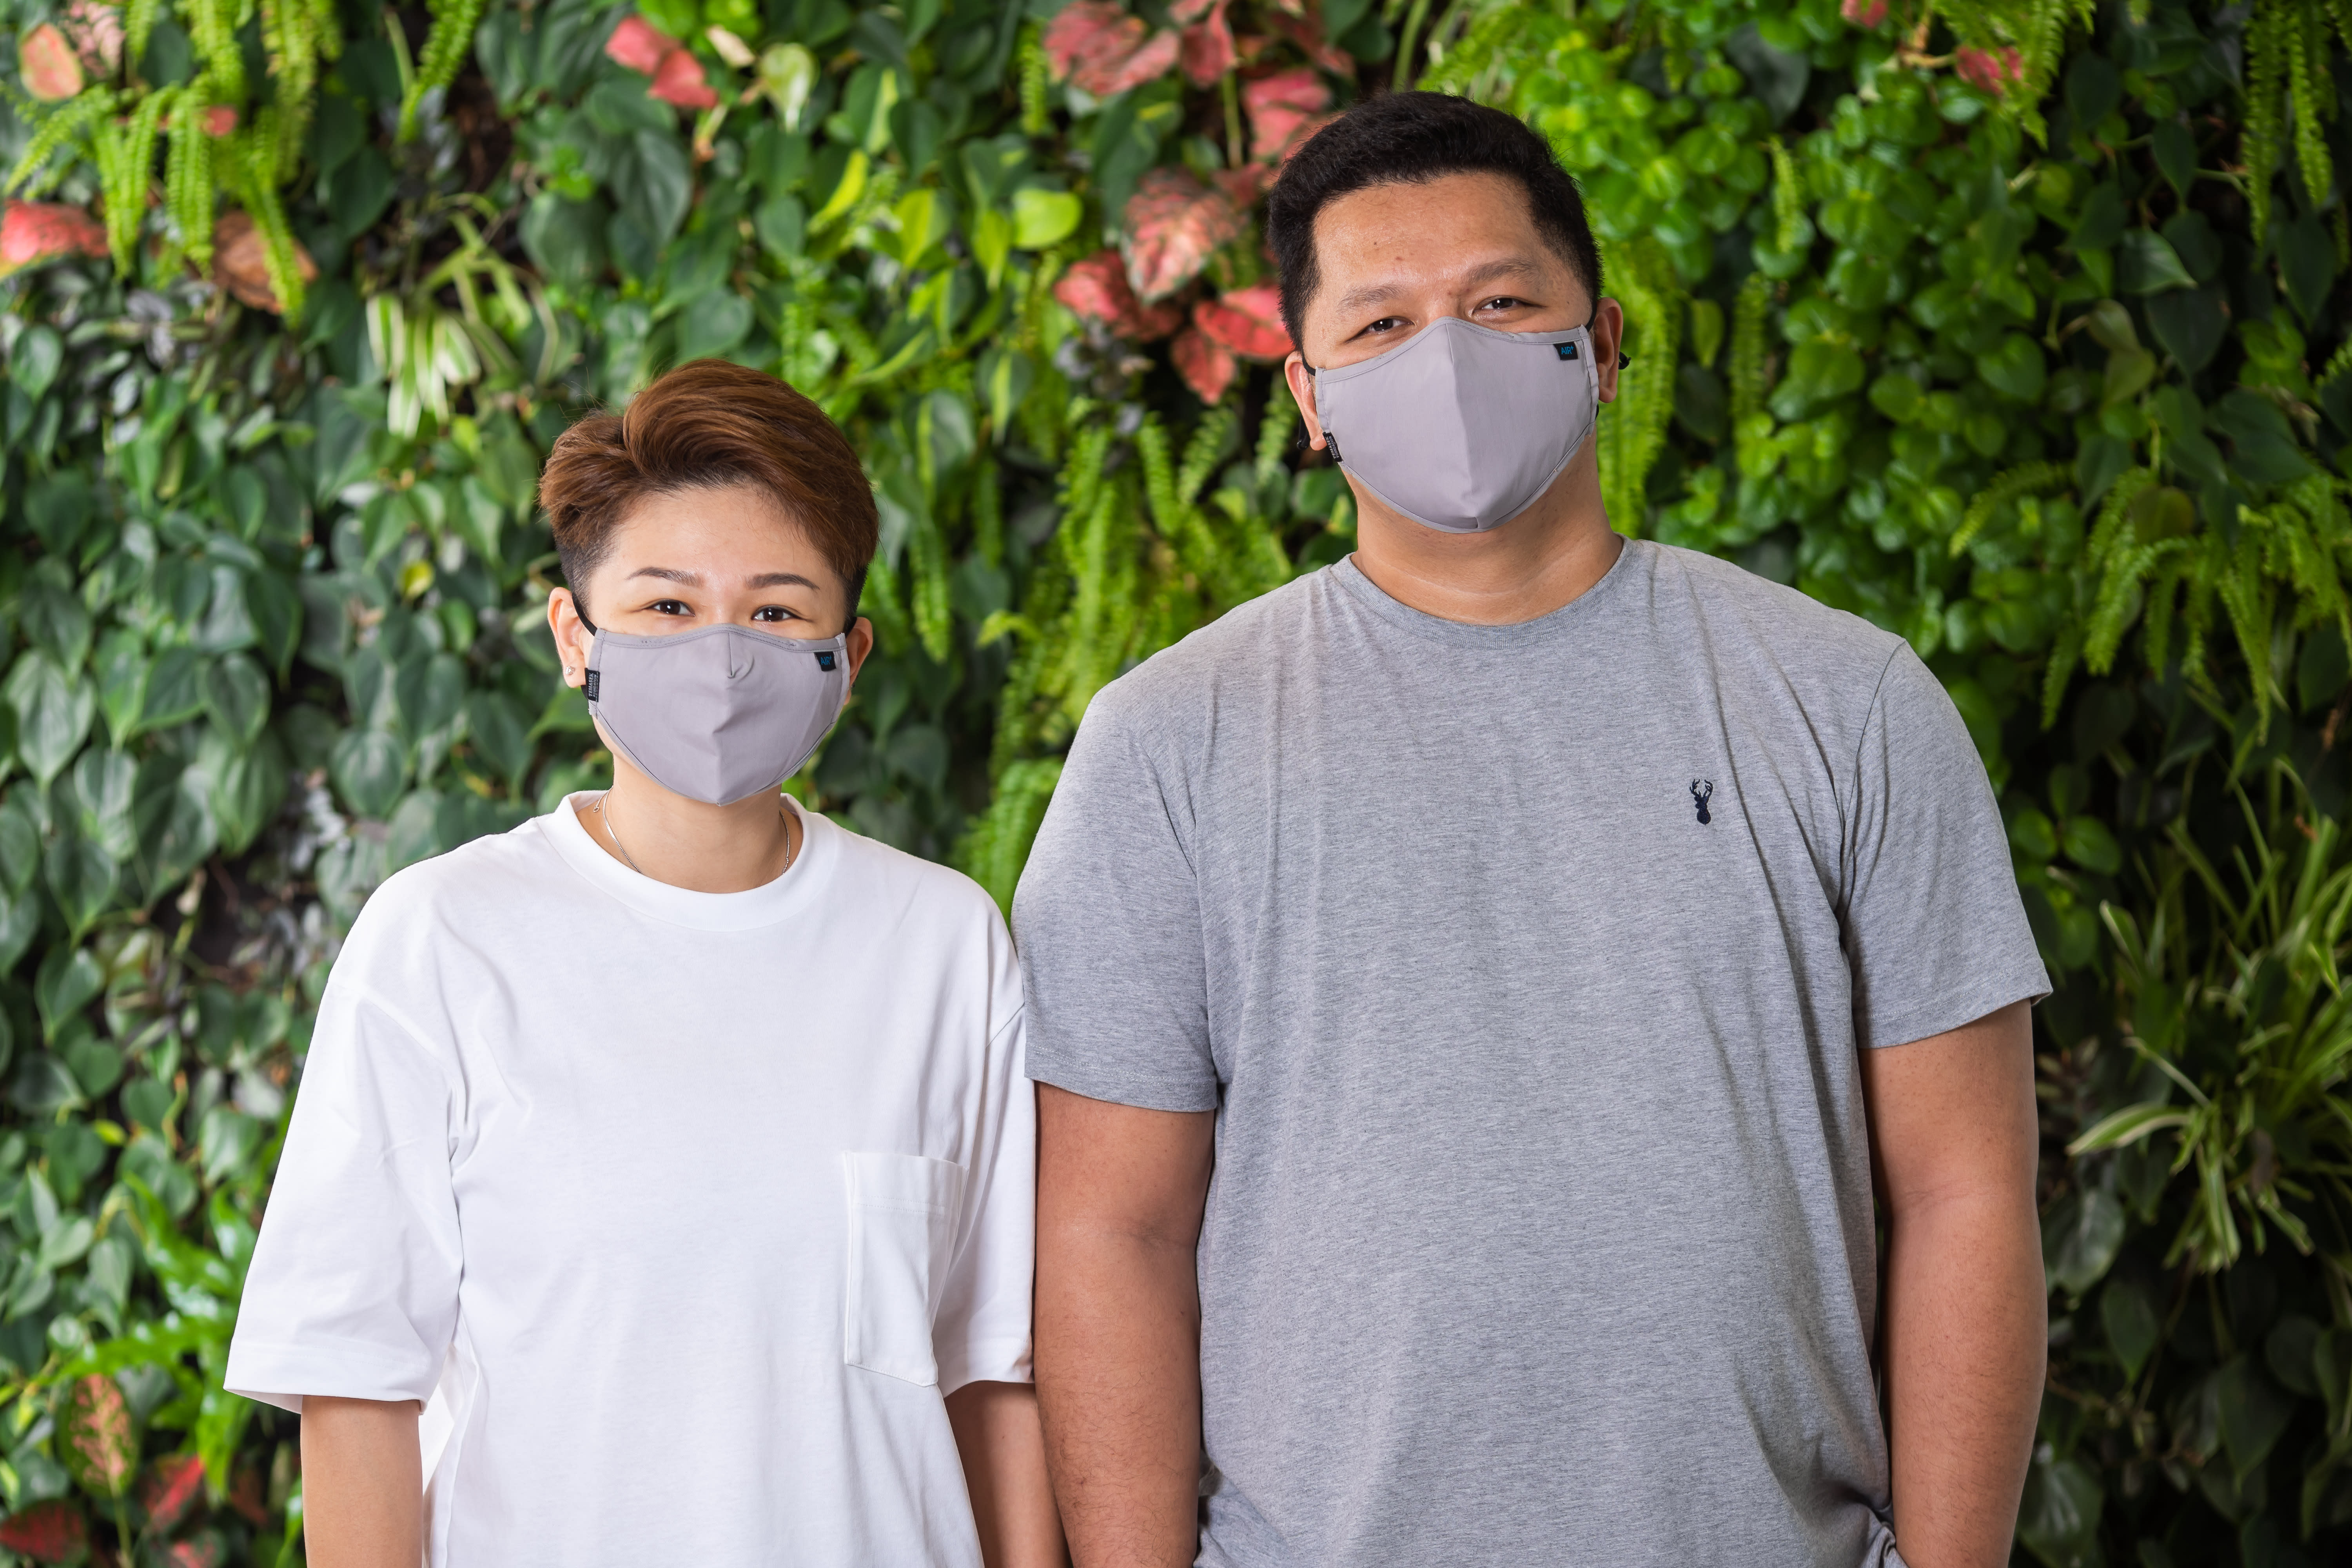 A new range of protective face masks are available in medium (left) and large (right) sizes.